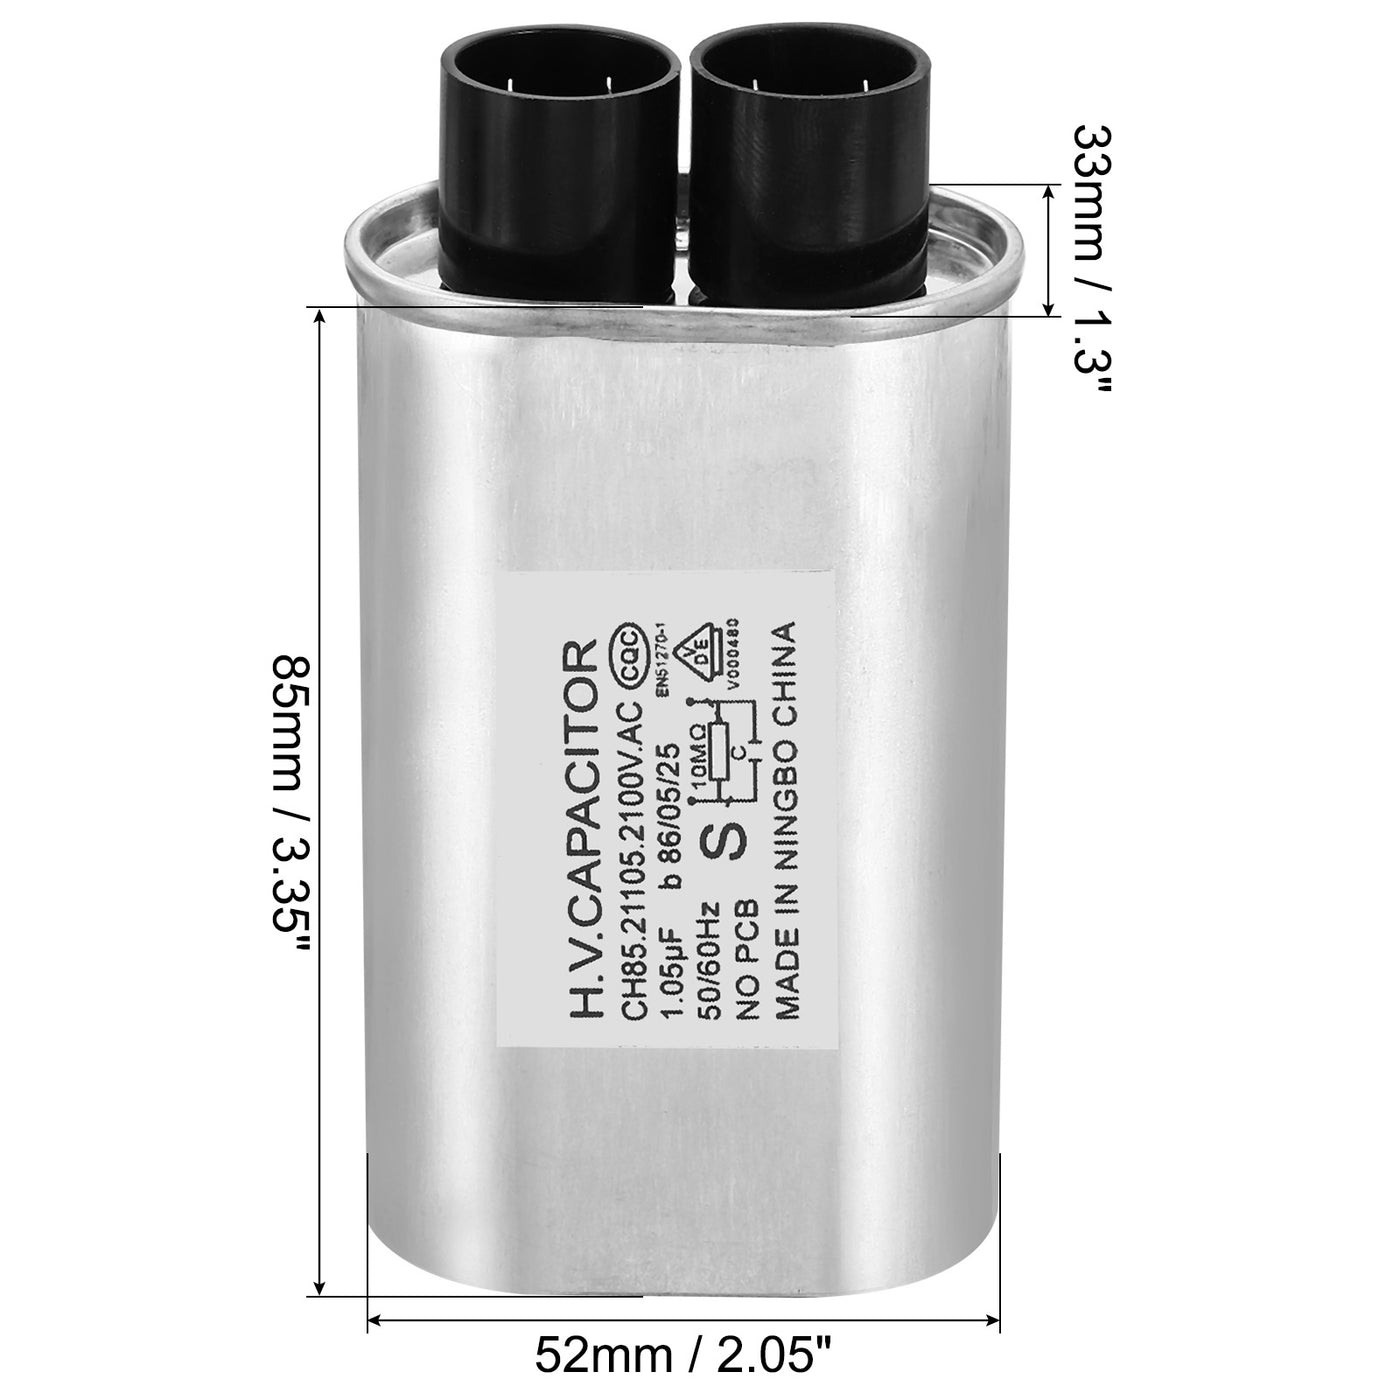 Harfington Microwave Capacitor, 1.05uF AC 2100V High Voltage 7mm Pin Distance